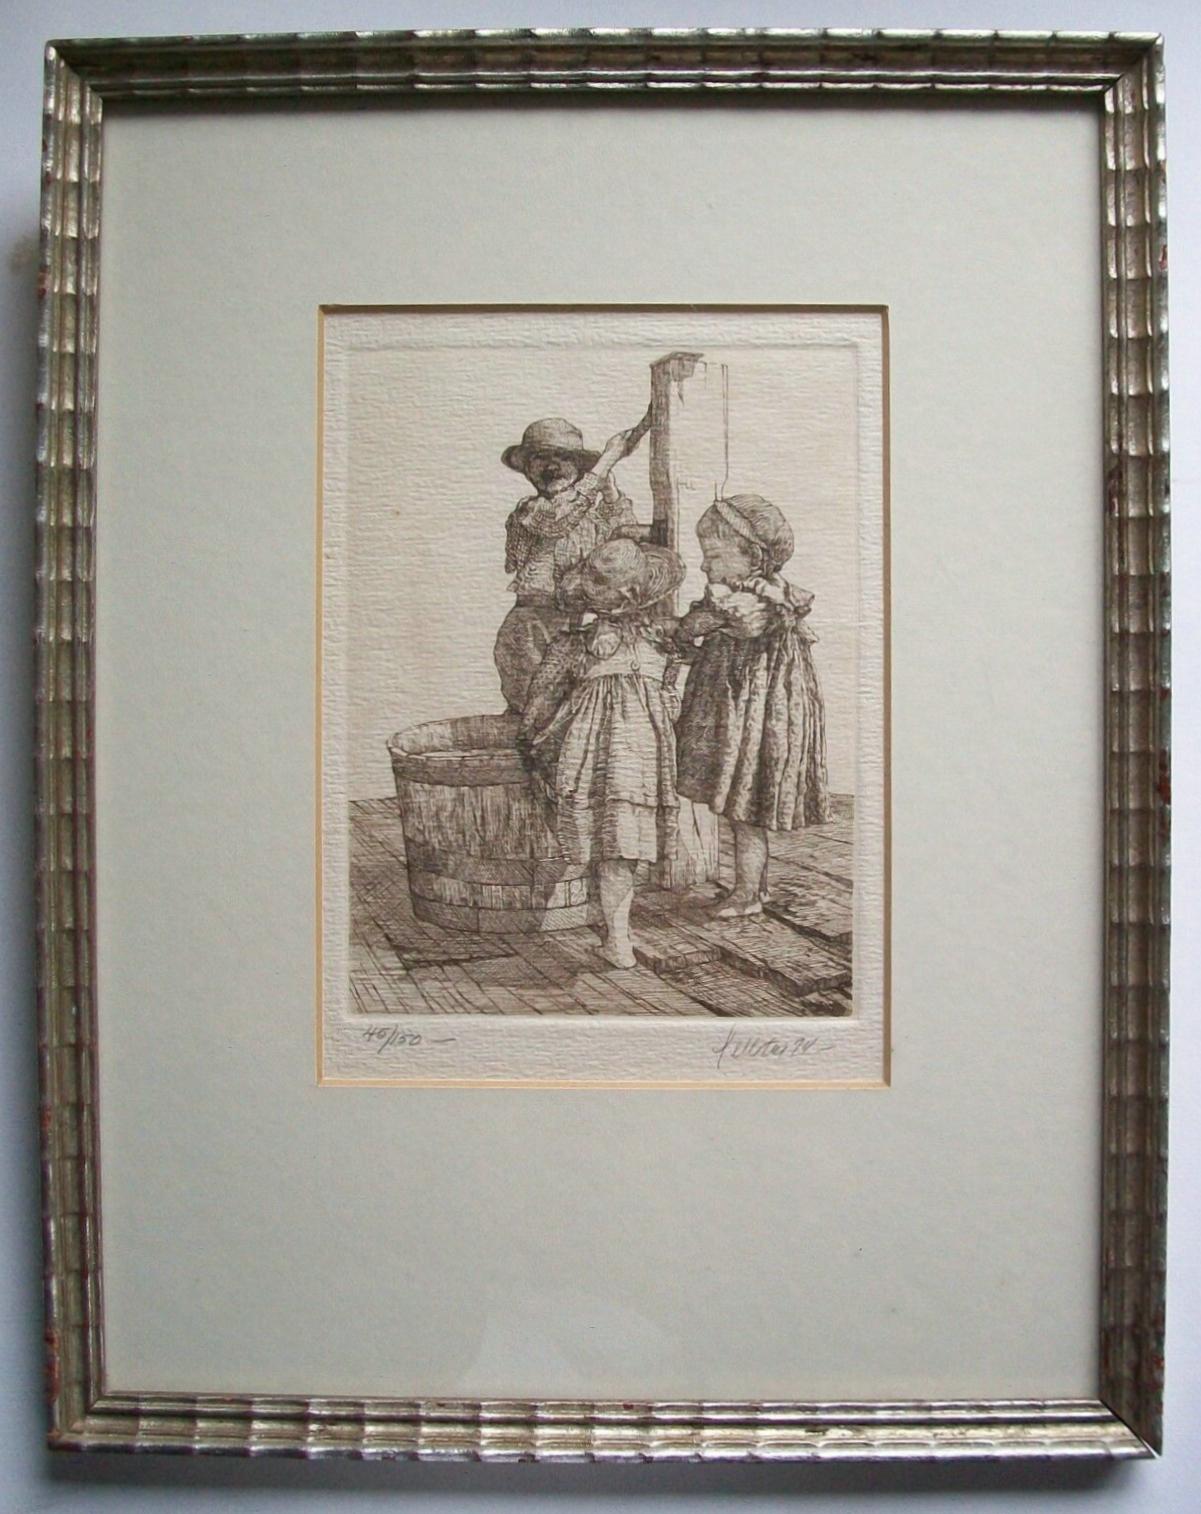 PELLETIER - 45/150 - Antique sepia engraving on paper featuring children at a water well - numbered in pencil lower left - signed and dated in pencil lower right - contained in a vintage silver gilt frame and matte - Antiquarian print gallery/framer